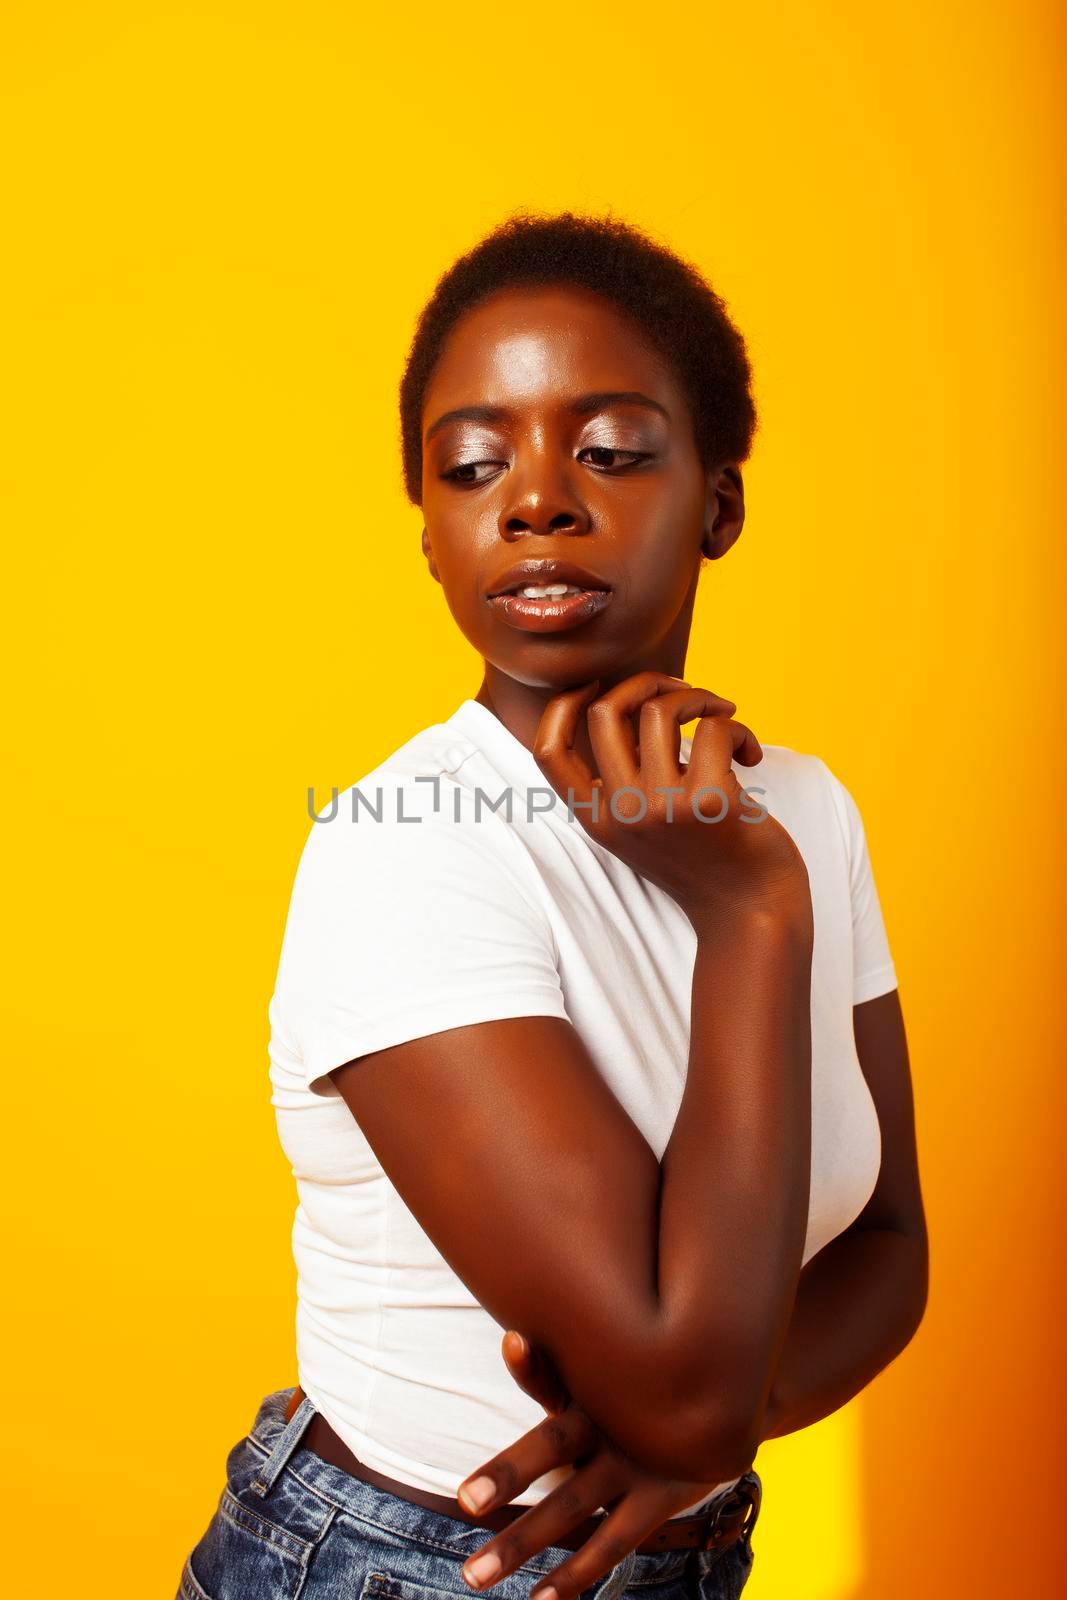 pretty young african american woman with curly hair posing cheerful gesturing on yellow background, lifestyle people concept close up